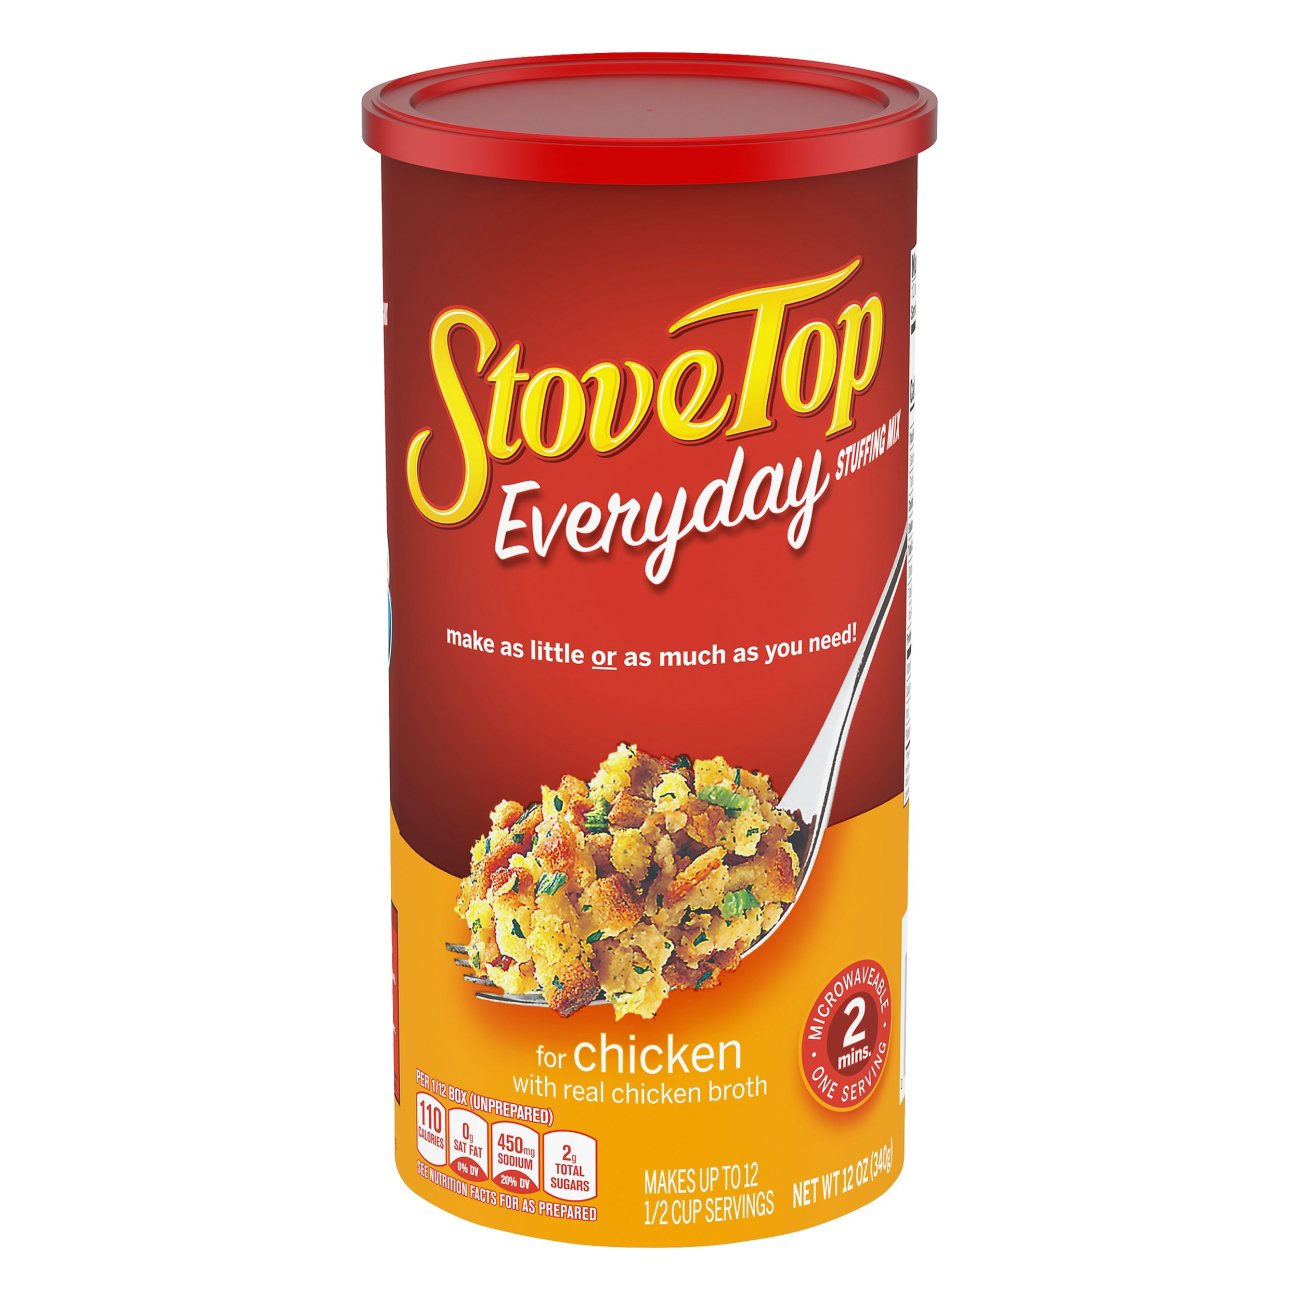 Stove Top Turkey Stuffing Mix (12 oz Boxes, Pack of 2)